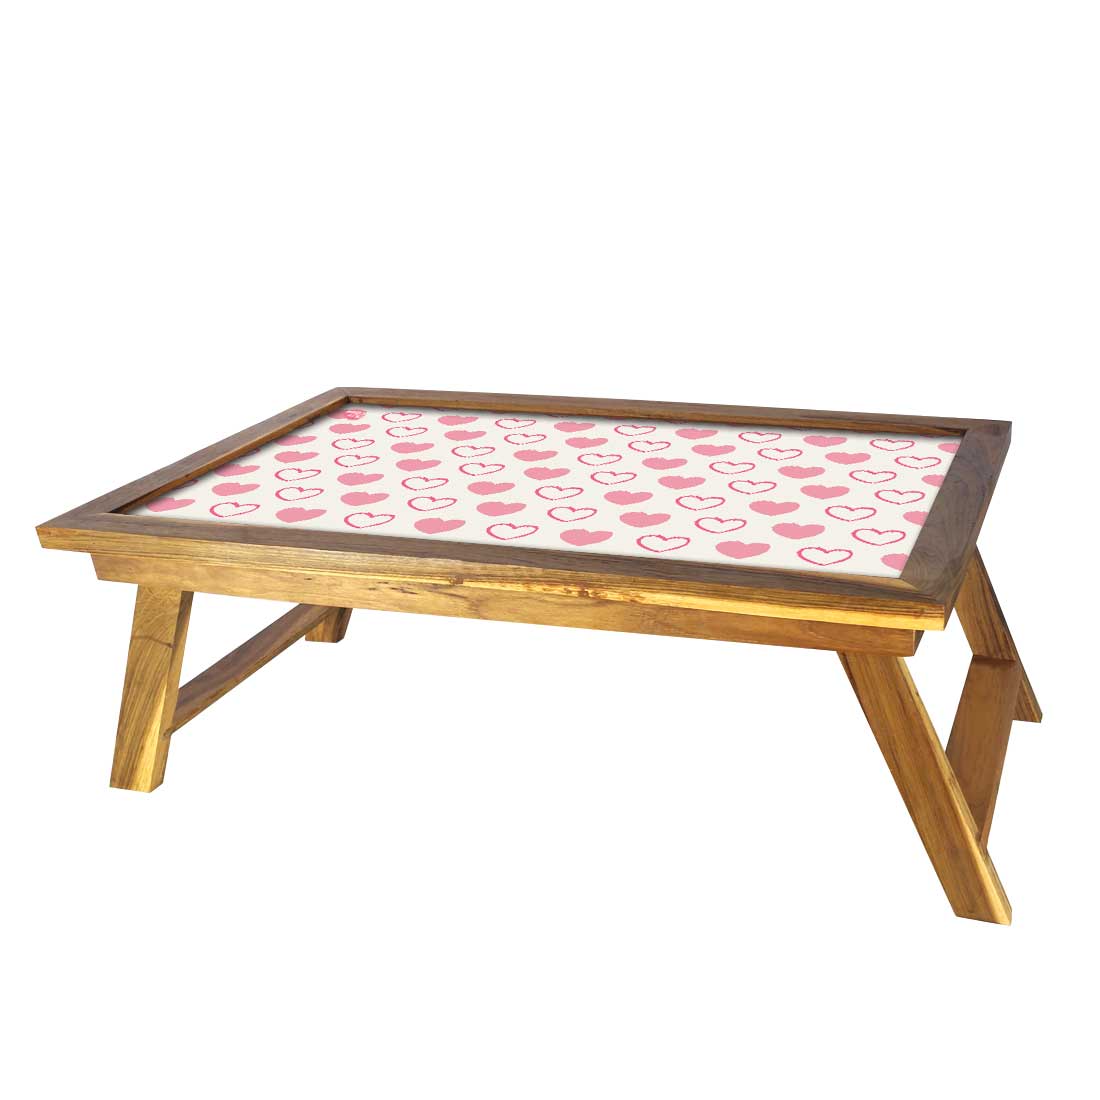 Folding Wooden Reading Desk for Bed Breakfast Table - Pink Hearts Nutcase